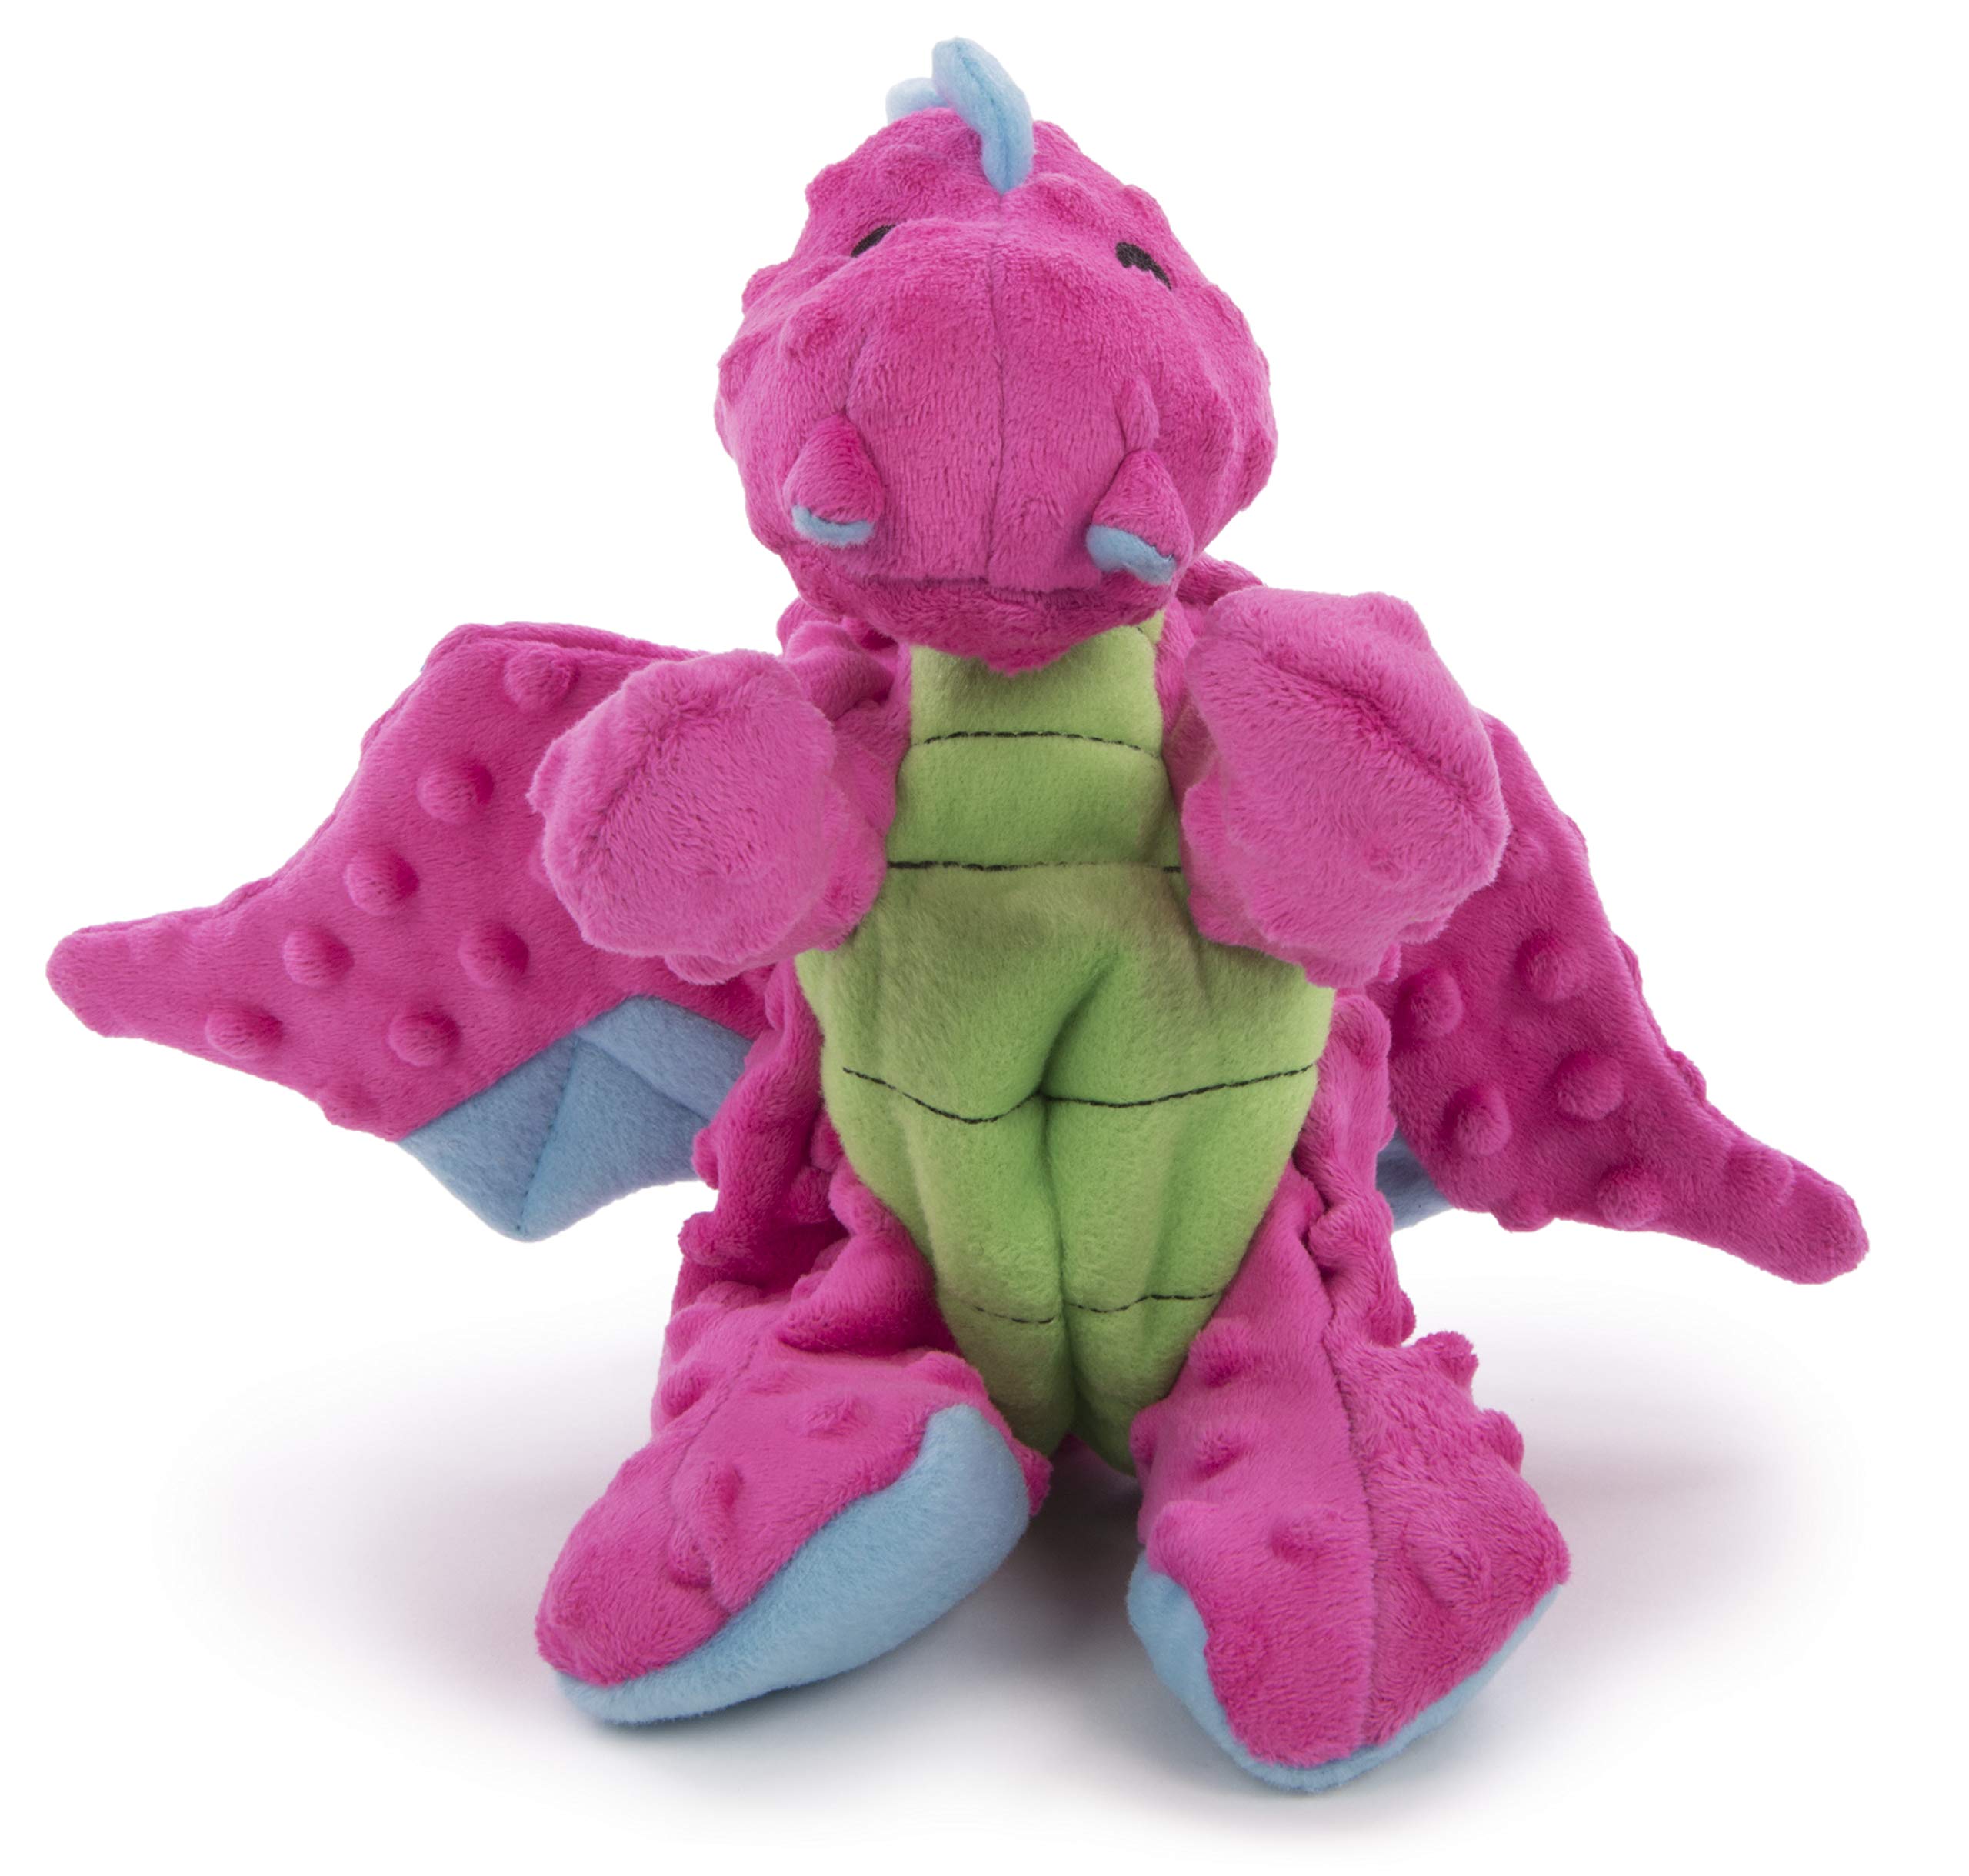 Book Cover goDog Bubble Plush Dragons Squeaky Dog Toy, Chew Guard Technology - Pink, Large Bubble Plush Dragon Large Bubble Plush Dragon - Pink